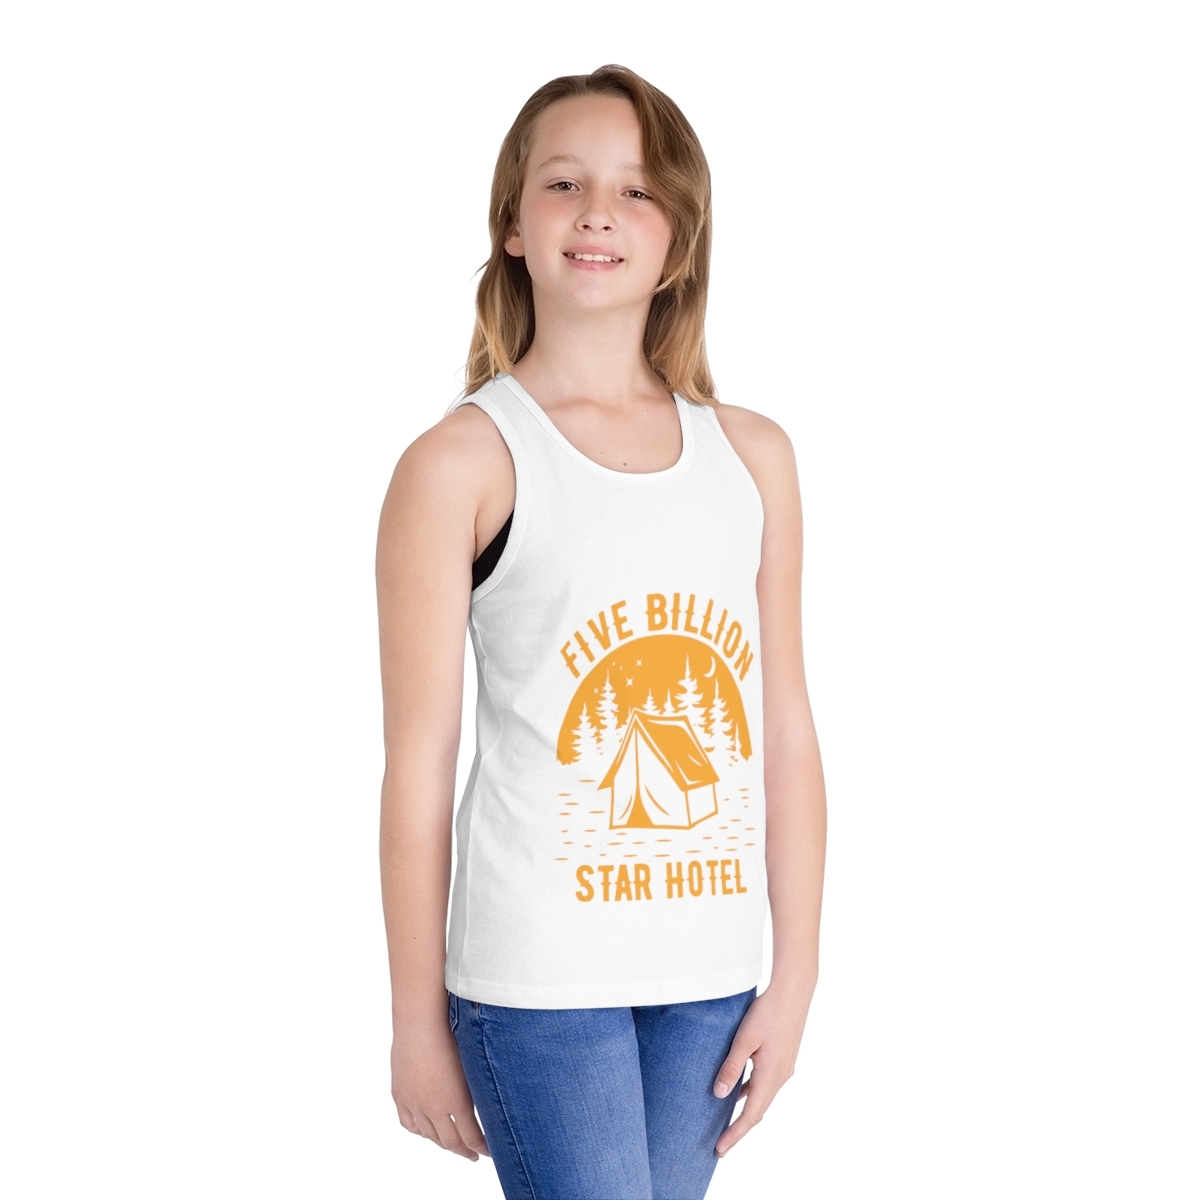 Primary image for Kid's Jersey Tank Top - Soft, Comfy, 100% Combed Cotton